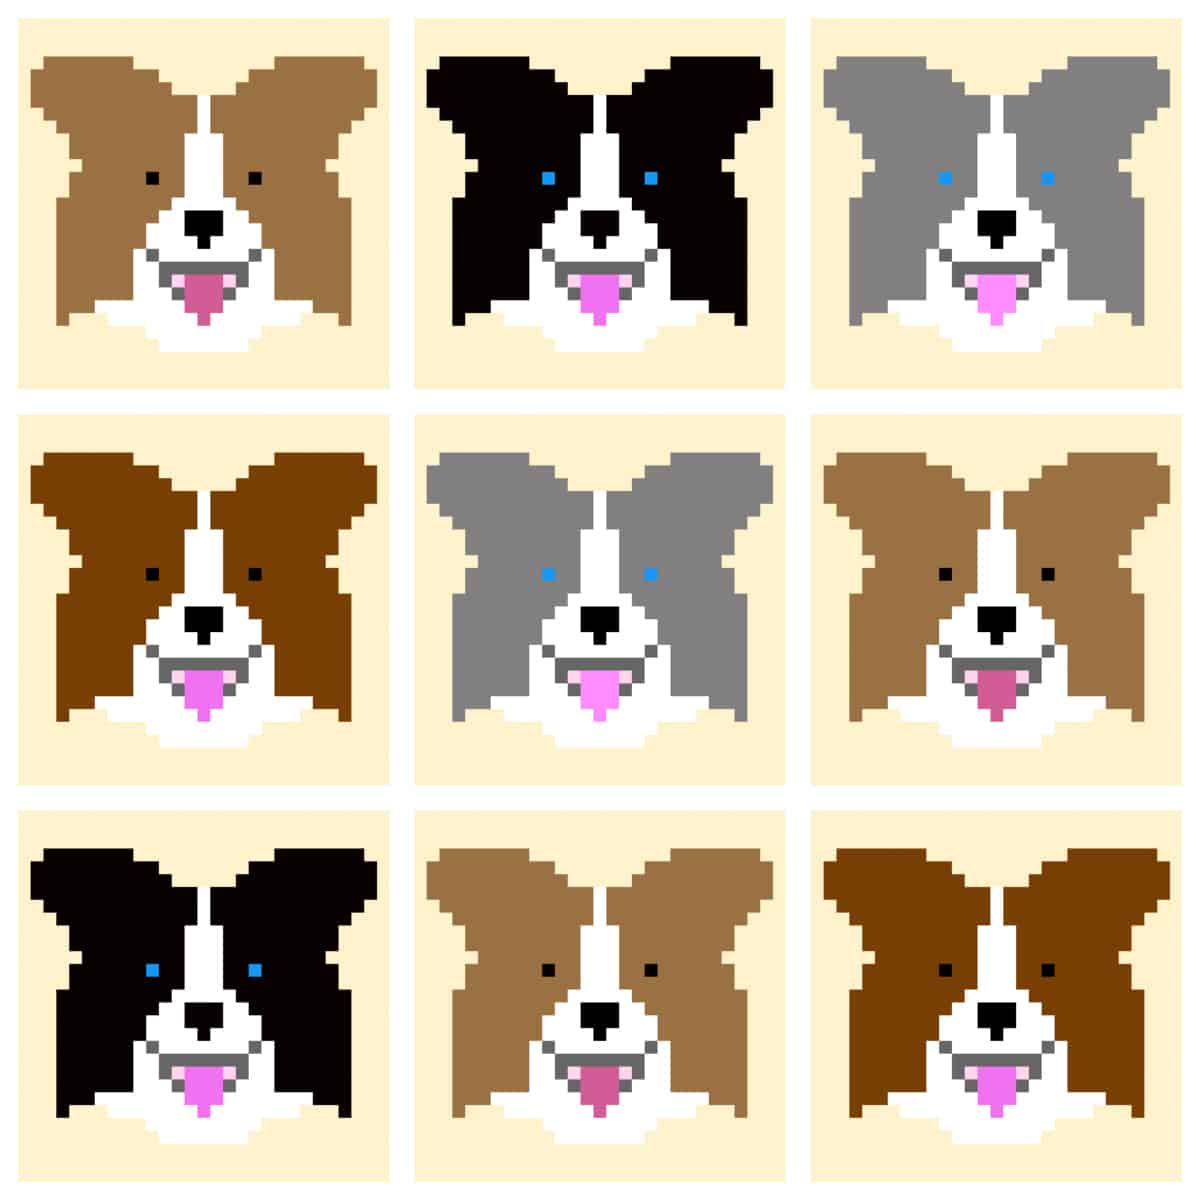 A grid of nine differently colored Border Collie and Australian Shepard dogs illustrated in a pixel style.